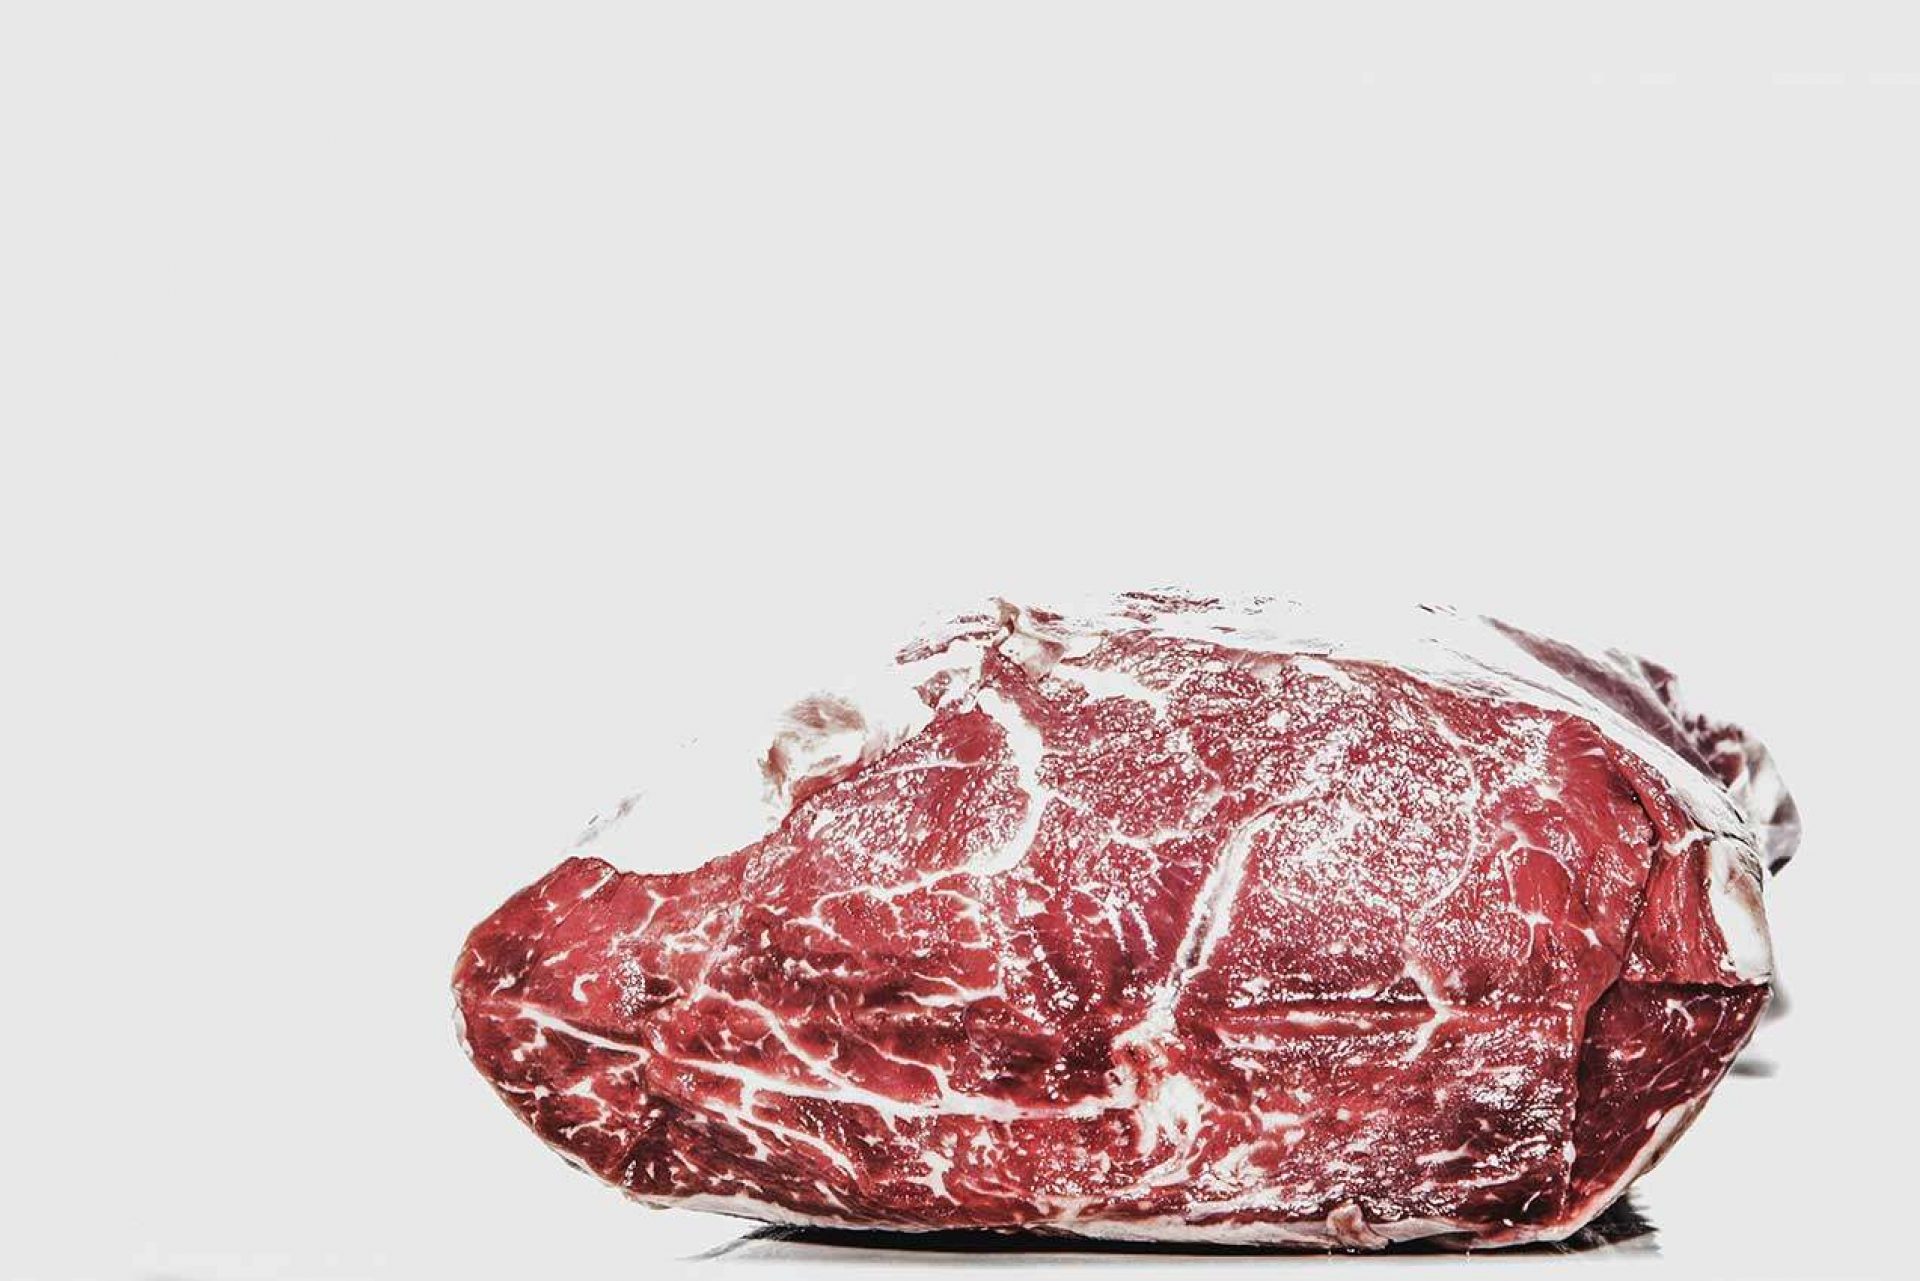 Cut of beef with marbling on white background